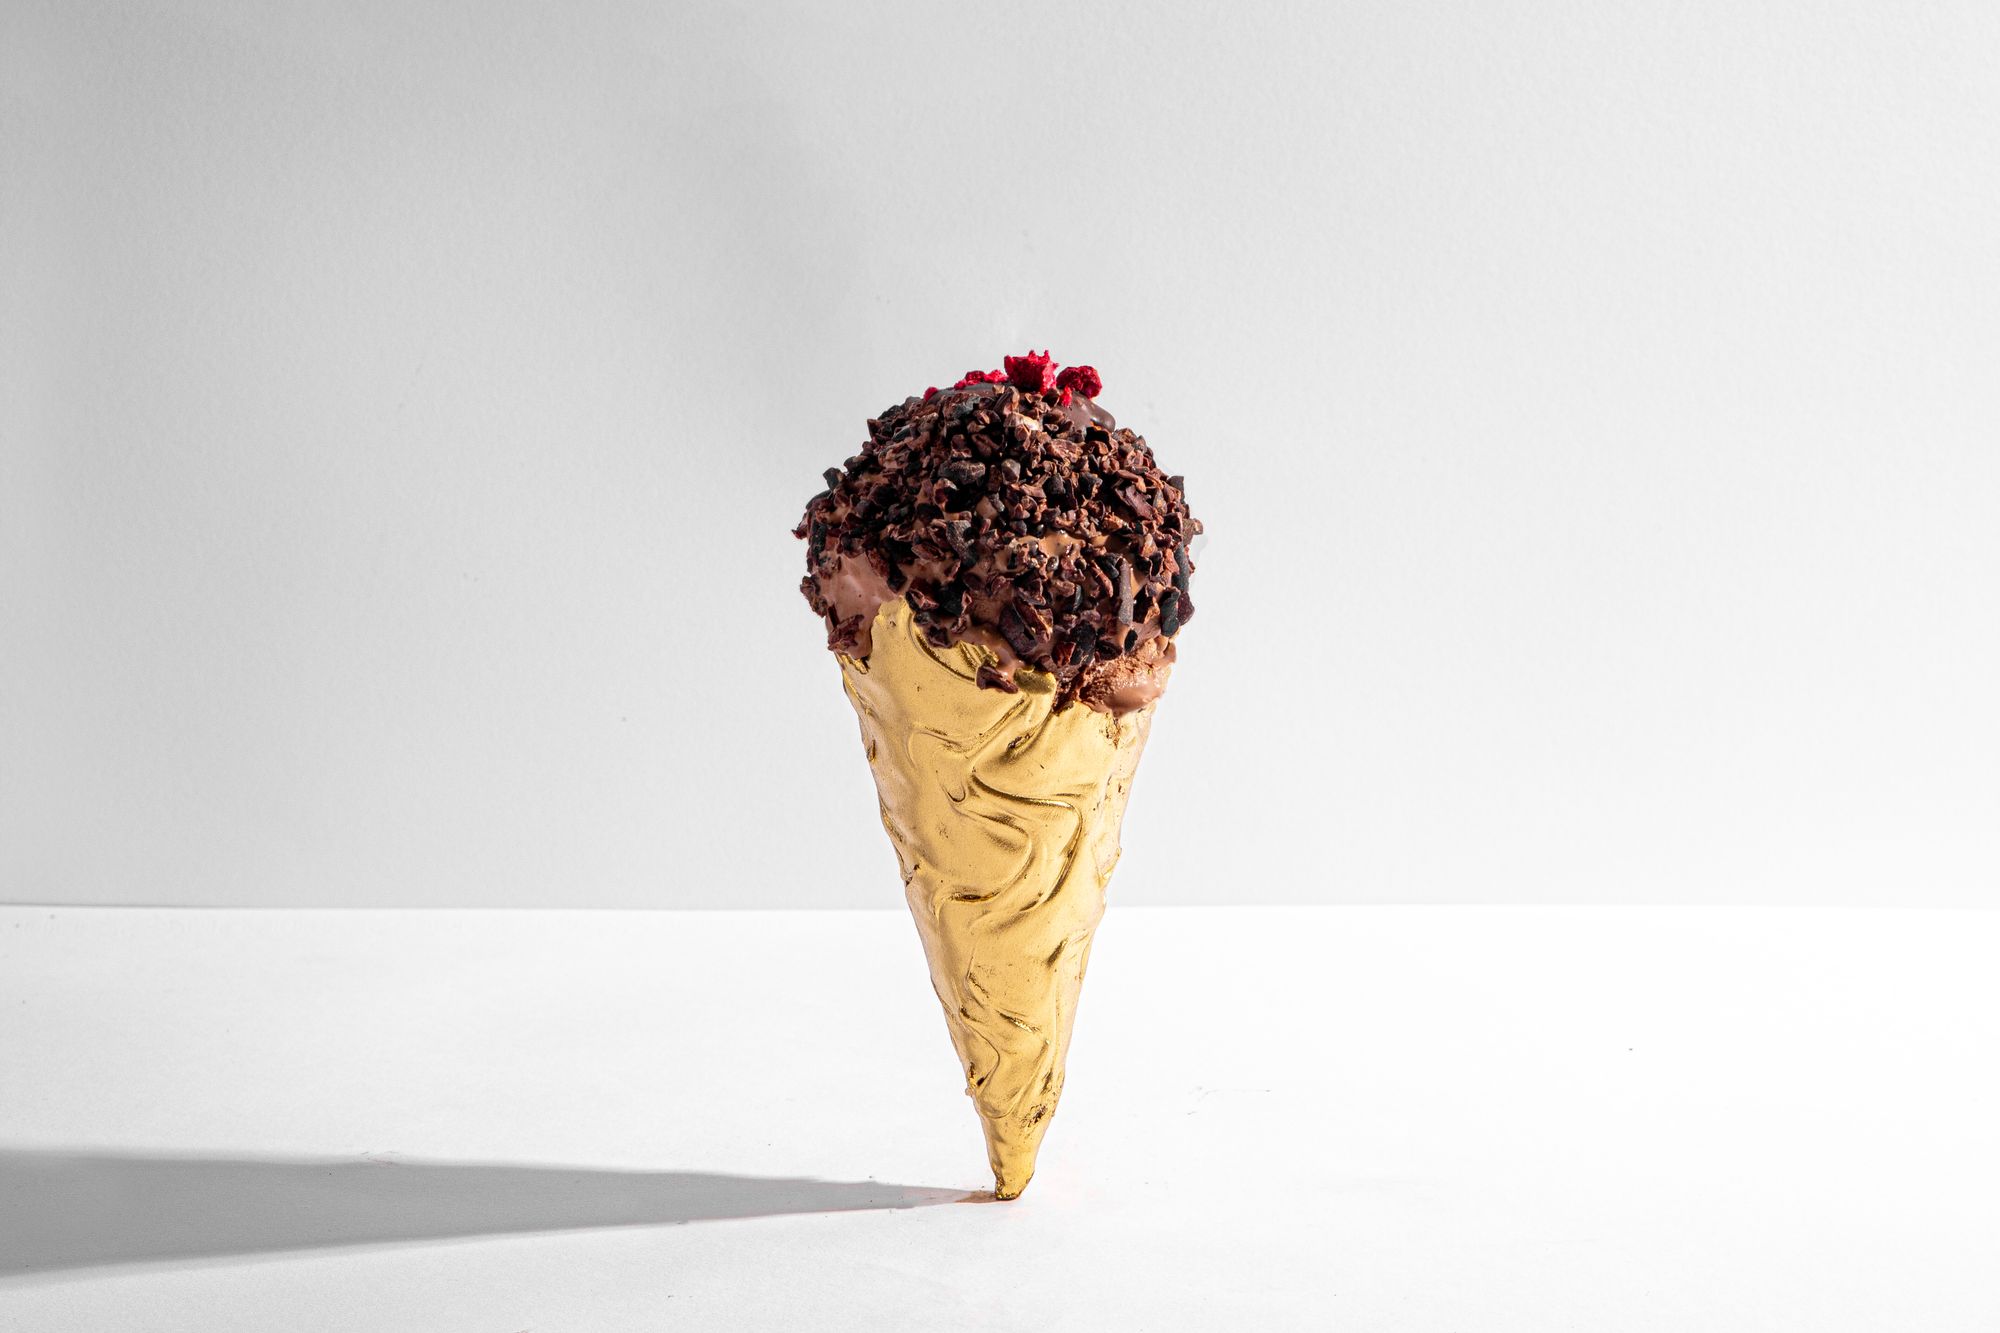 An ice cream cone that has been dusted with metallic gold powder.